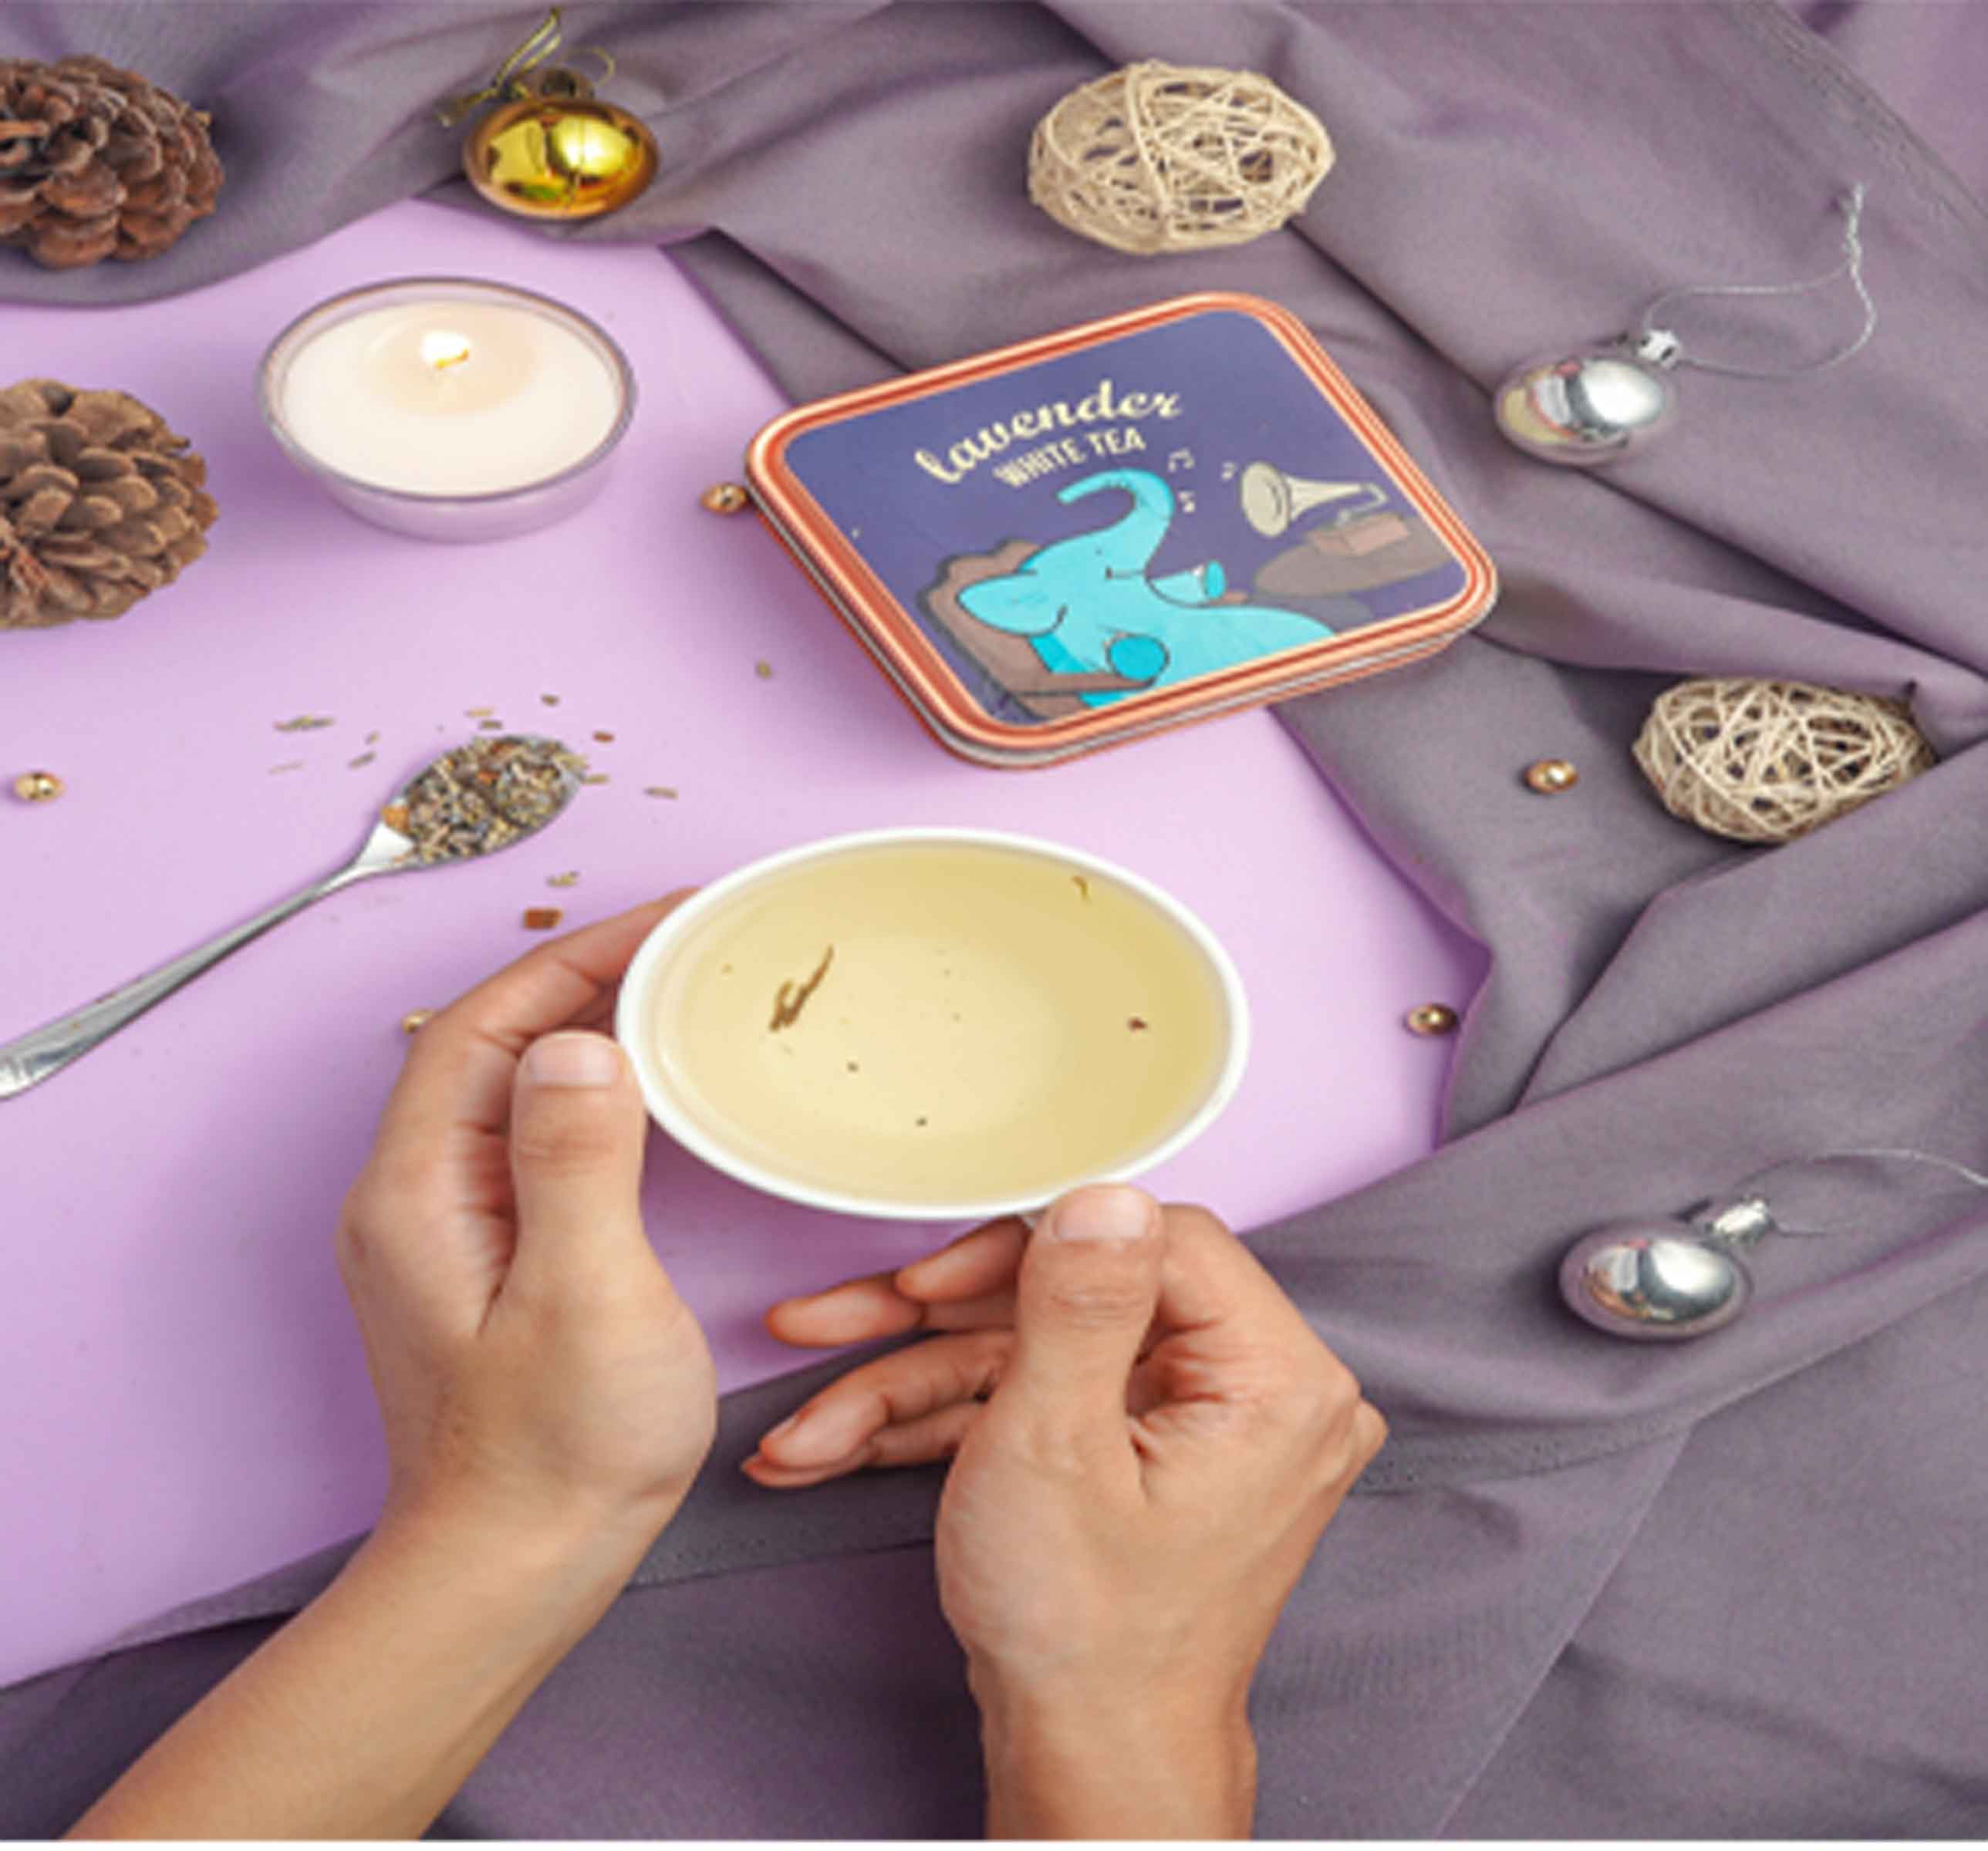 Tea Trunk founded by India’s first certified Tea Sommelier launches a collection of teas specially curated to relieve stress and anxiety